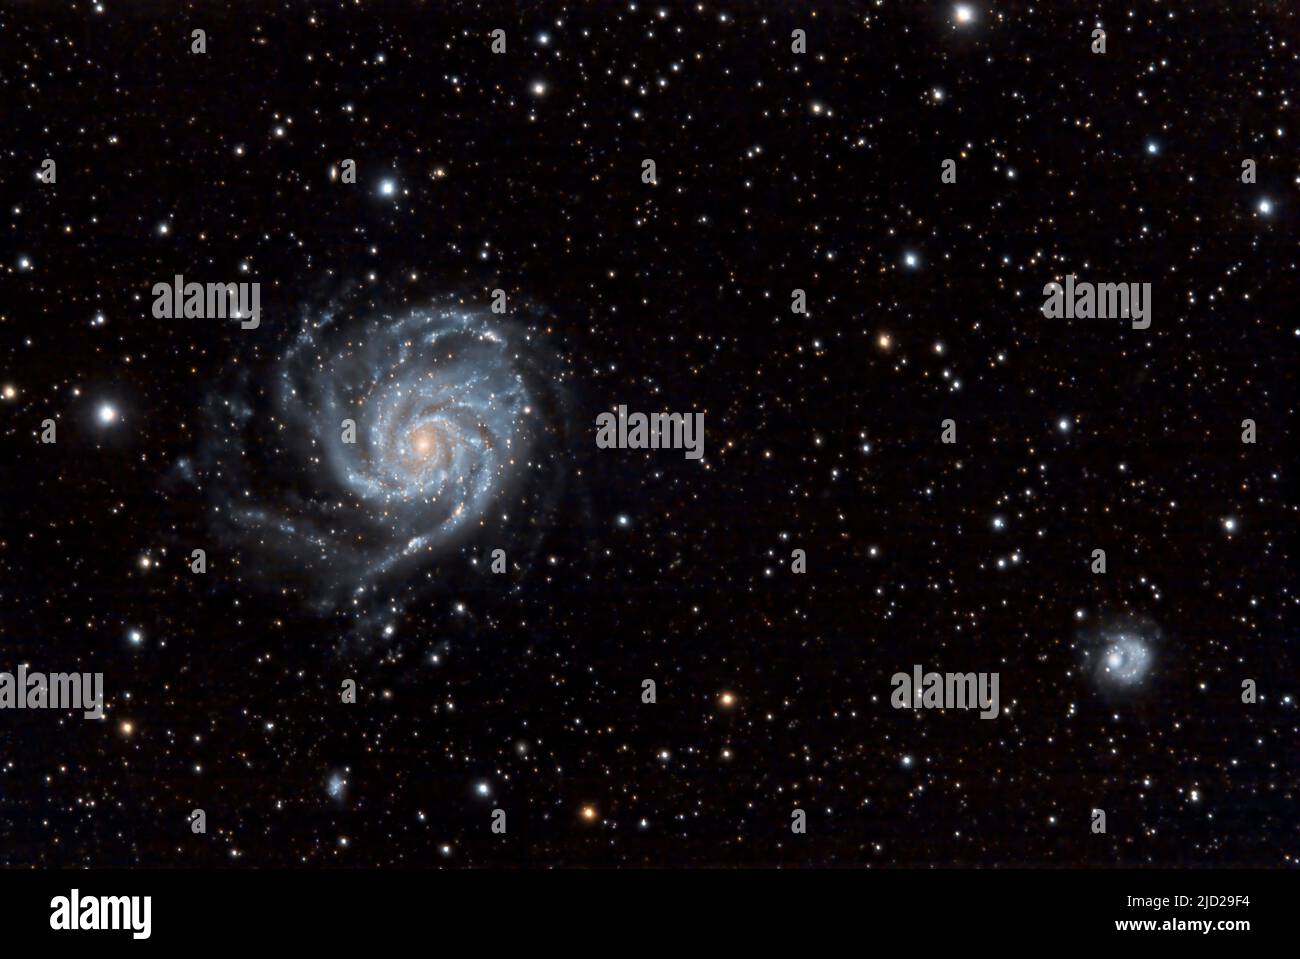 The Pinwheel Galaxy Messier 101 (NGC 5457) in the constellation Ursa Major (Big Dipper).  At lower right are the galaxies NGC5174 and PGC4545422. Stock Photo